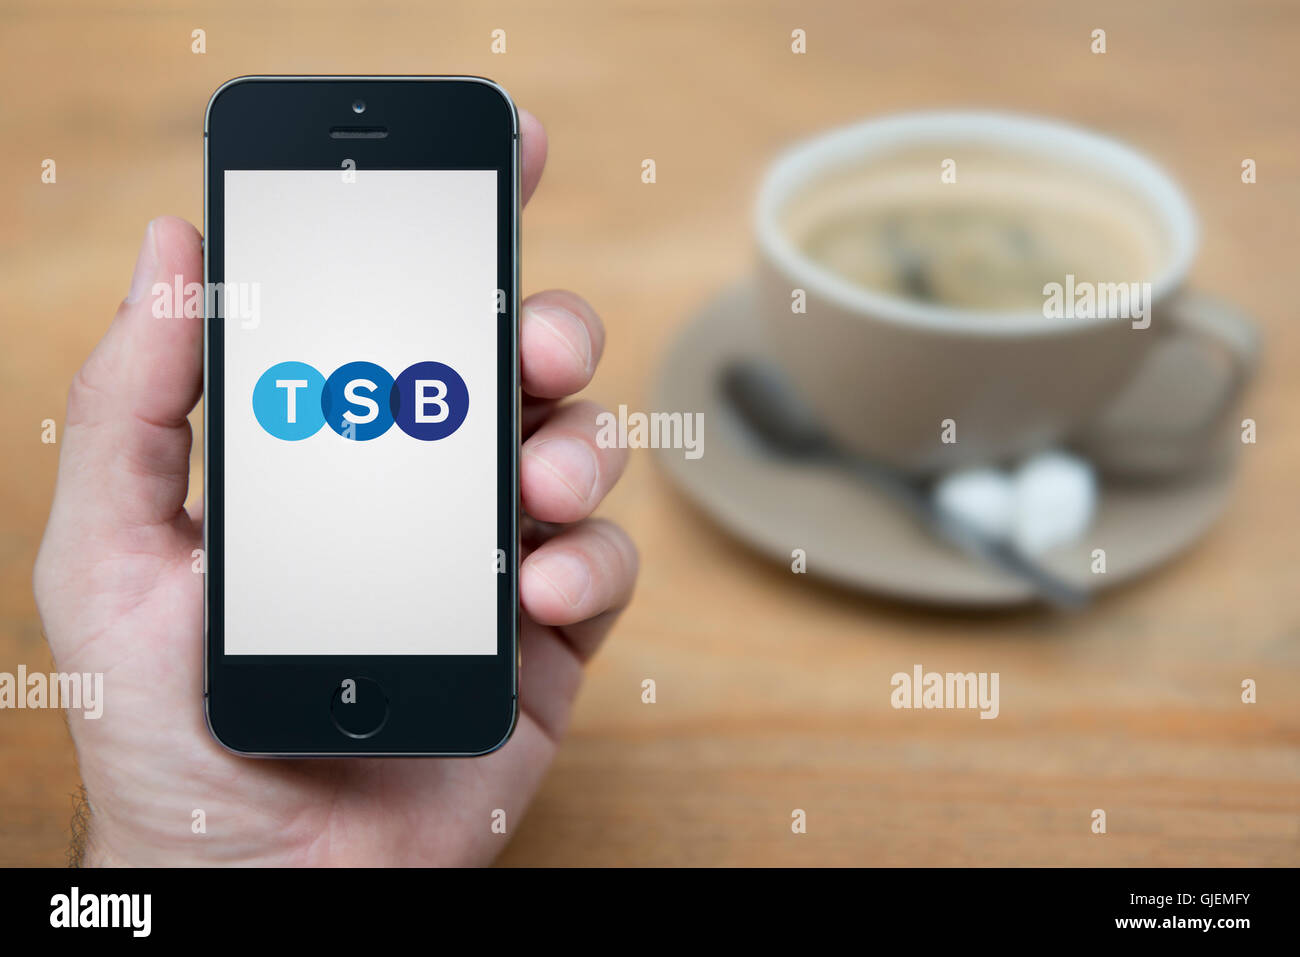 A man looks at his iPhone which displays the TSB bank logo, while sat with a cup of coffee (Editorial use only). Stock Photo